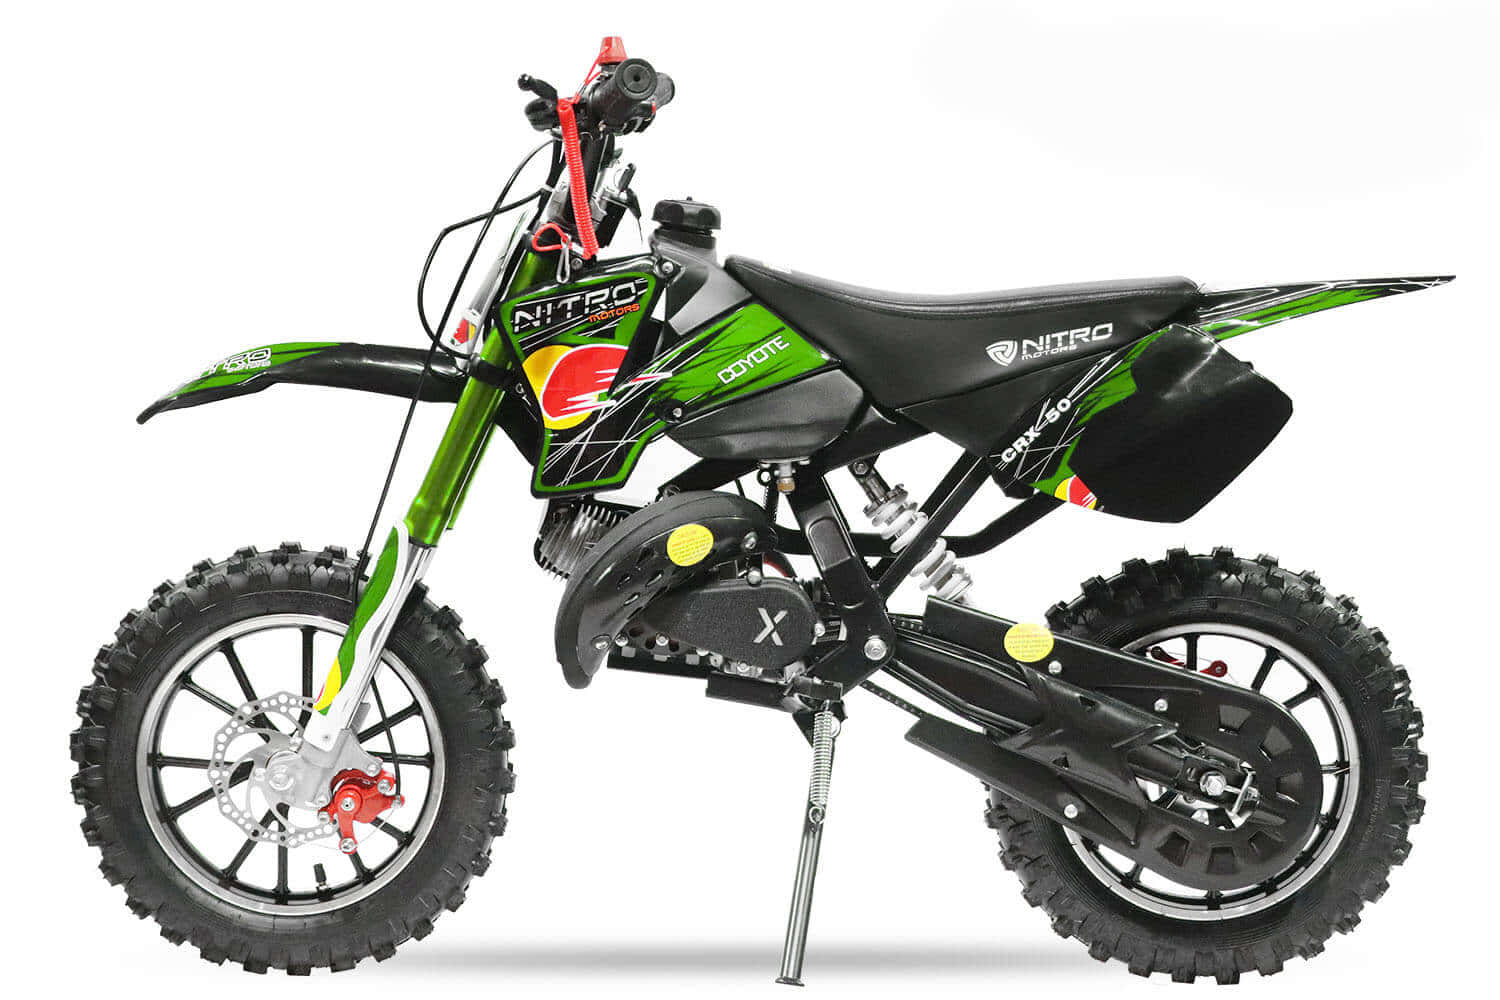 Speed up the dirt trail on your dirt bike!